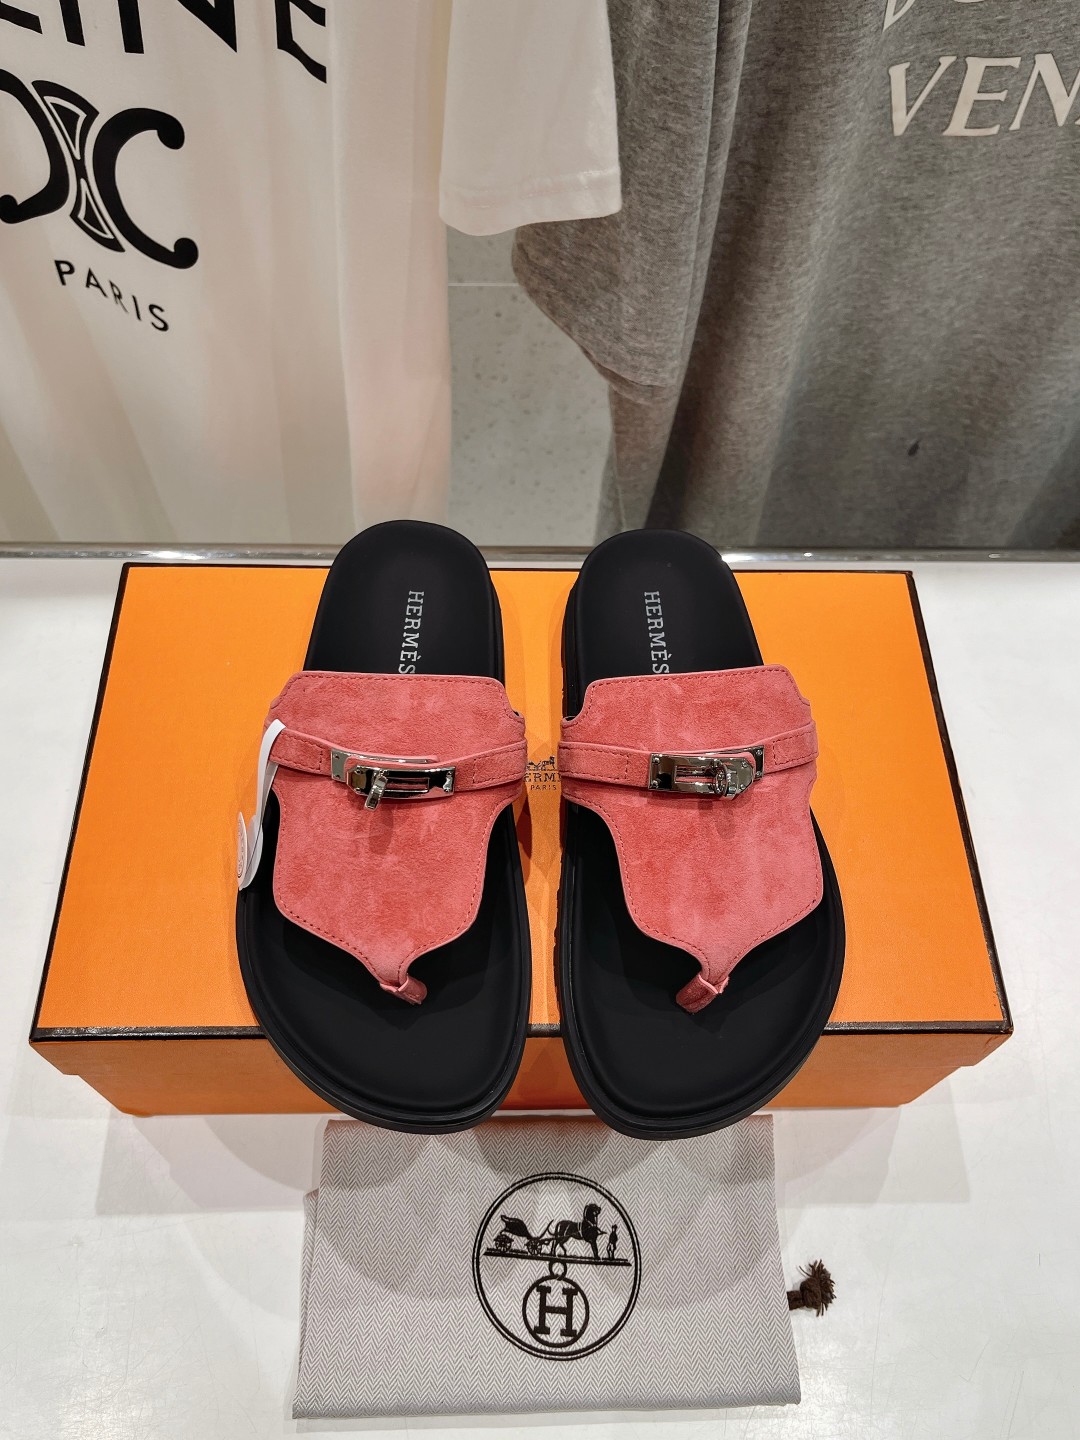 Hermes Shoes Slippers 7 Star Quality Designer Replica
 Cowhide Sheepskin Spring/Summer Collection